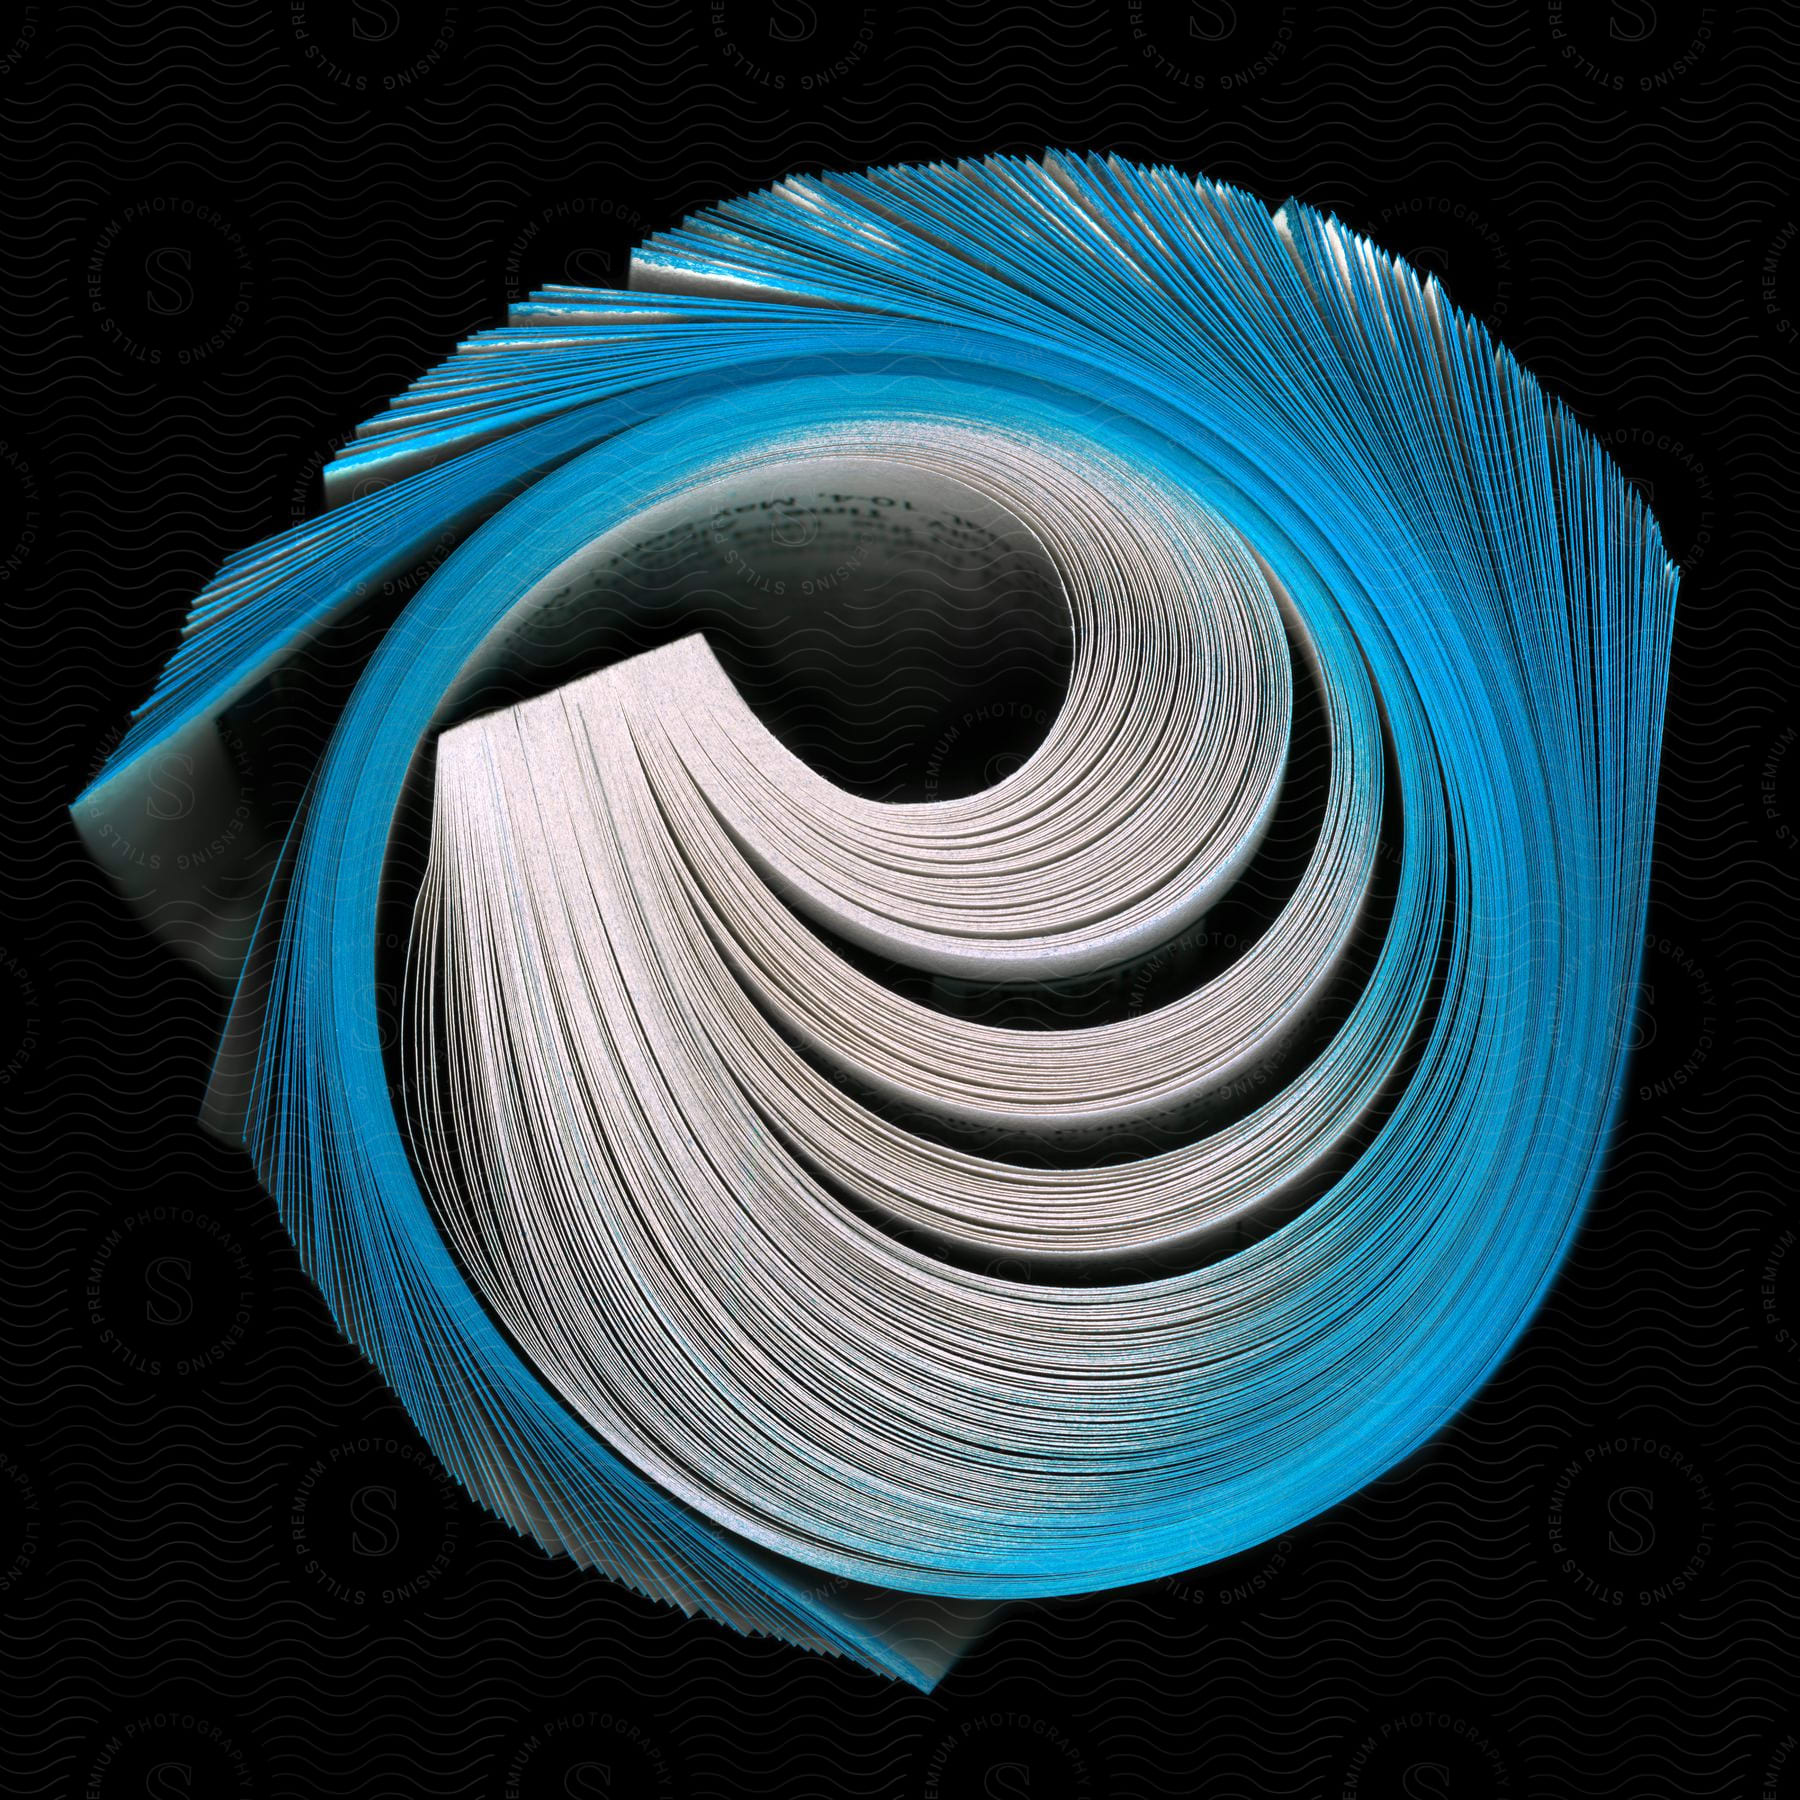 A twisted book with blueedged pages